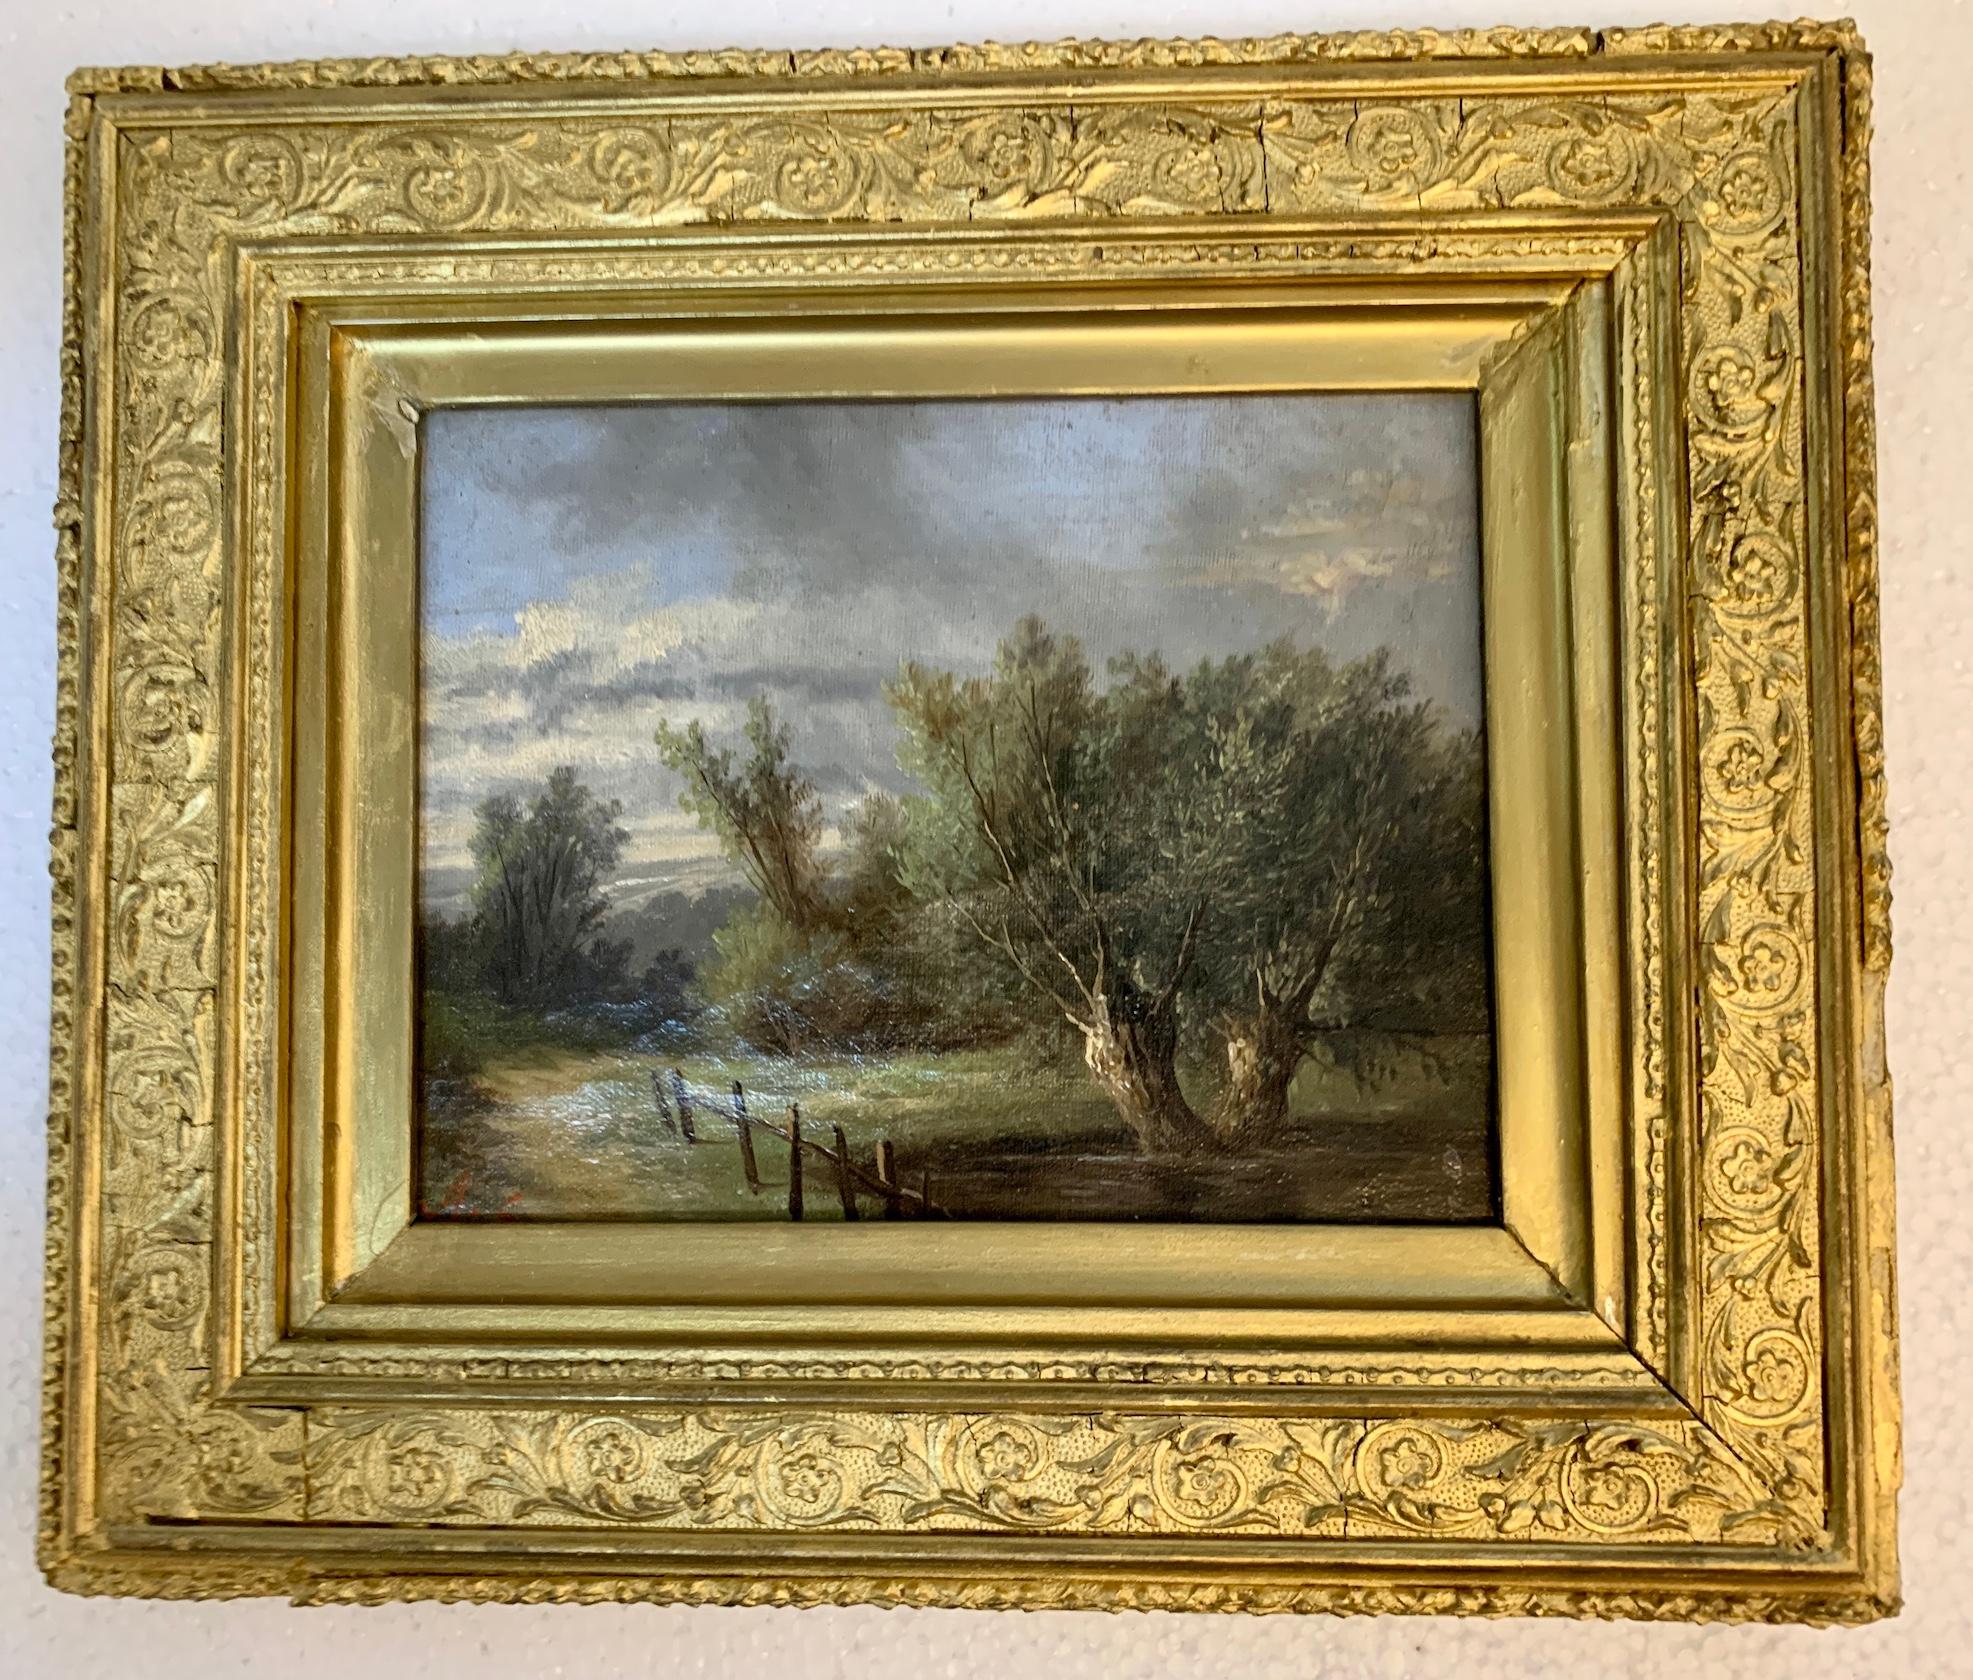 Ada Stone Landscape Painting - 19th century English landscape with Oak and Yew trees on a pathway